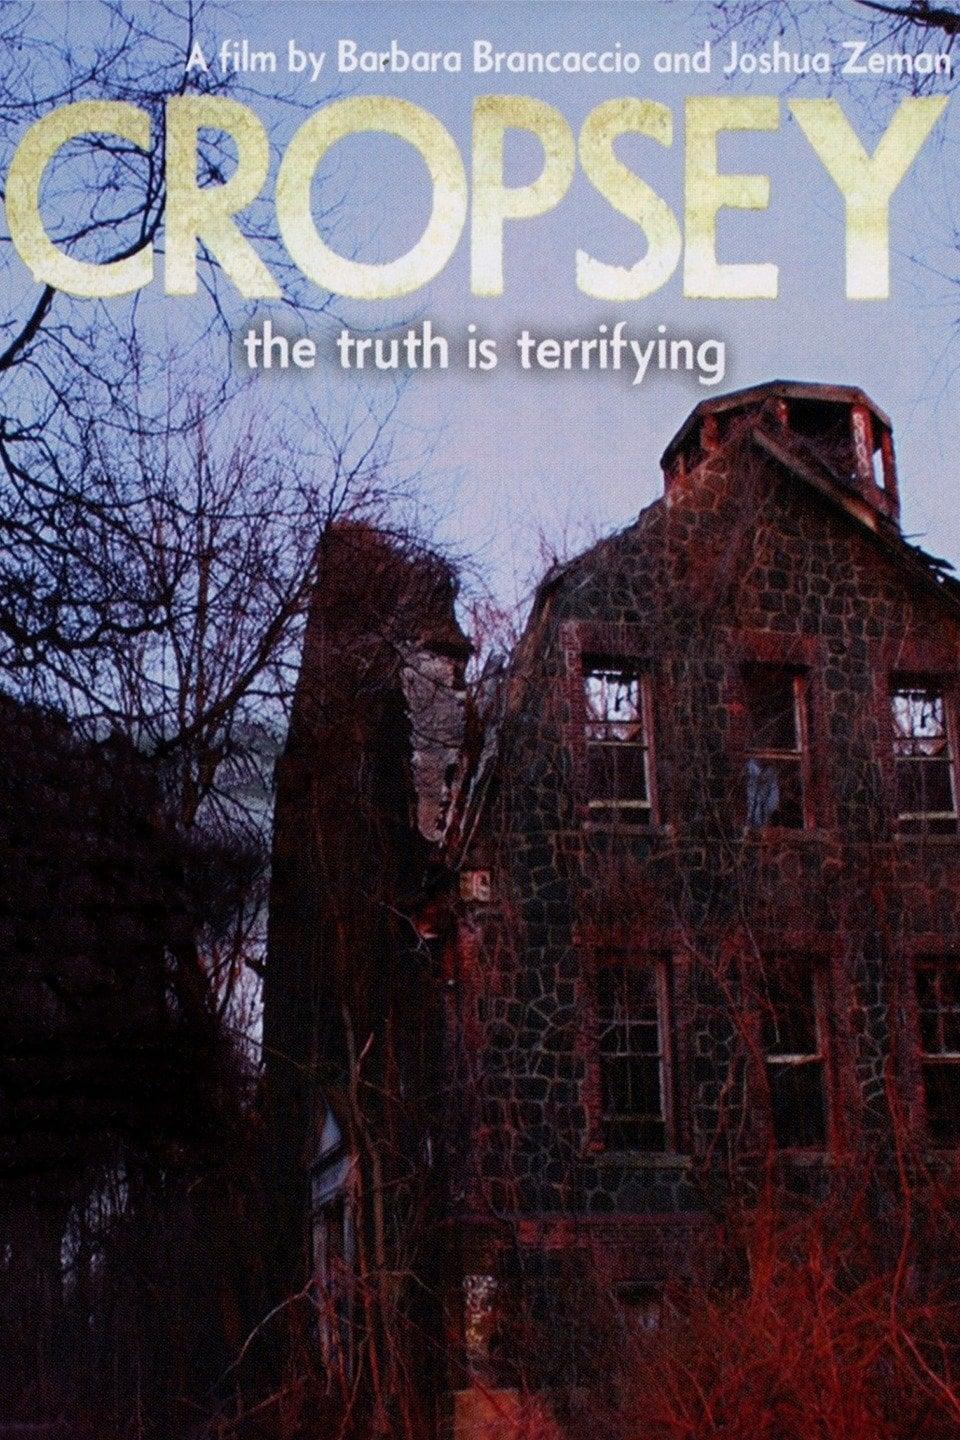 Cropsey poster